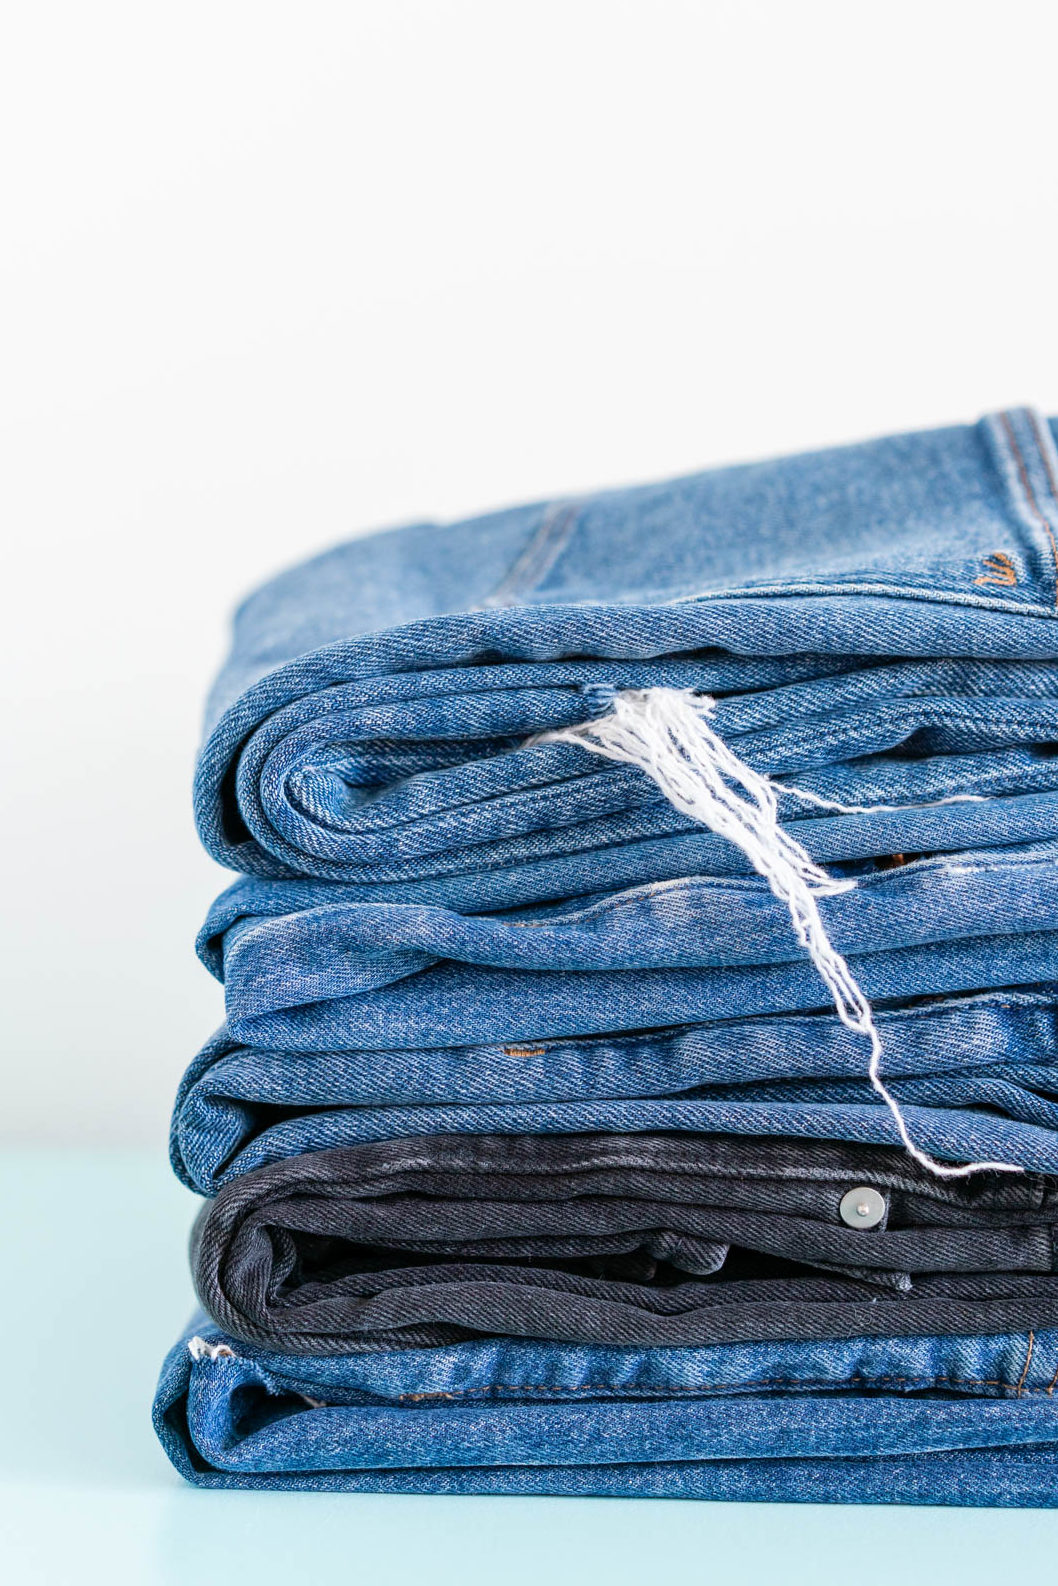 A pile of 5 pairs of Madewell denim jeans